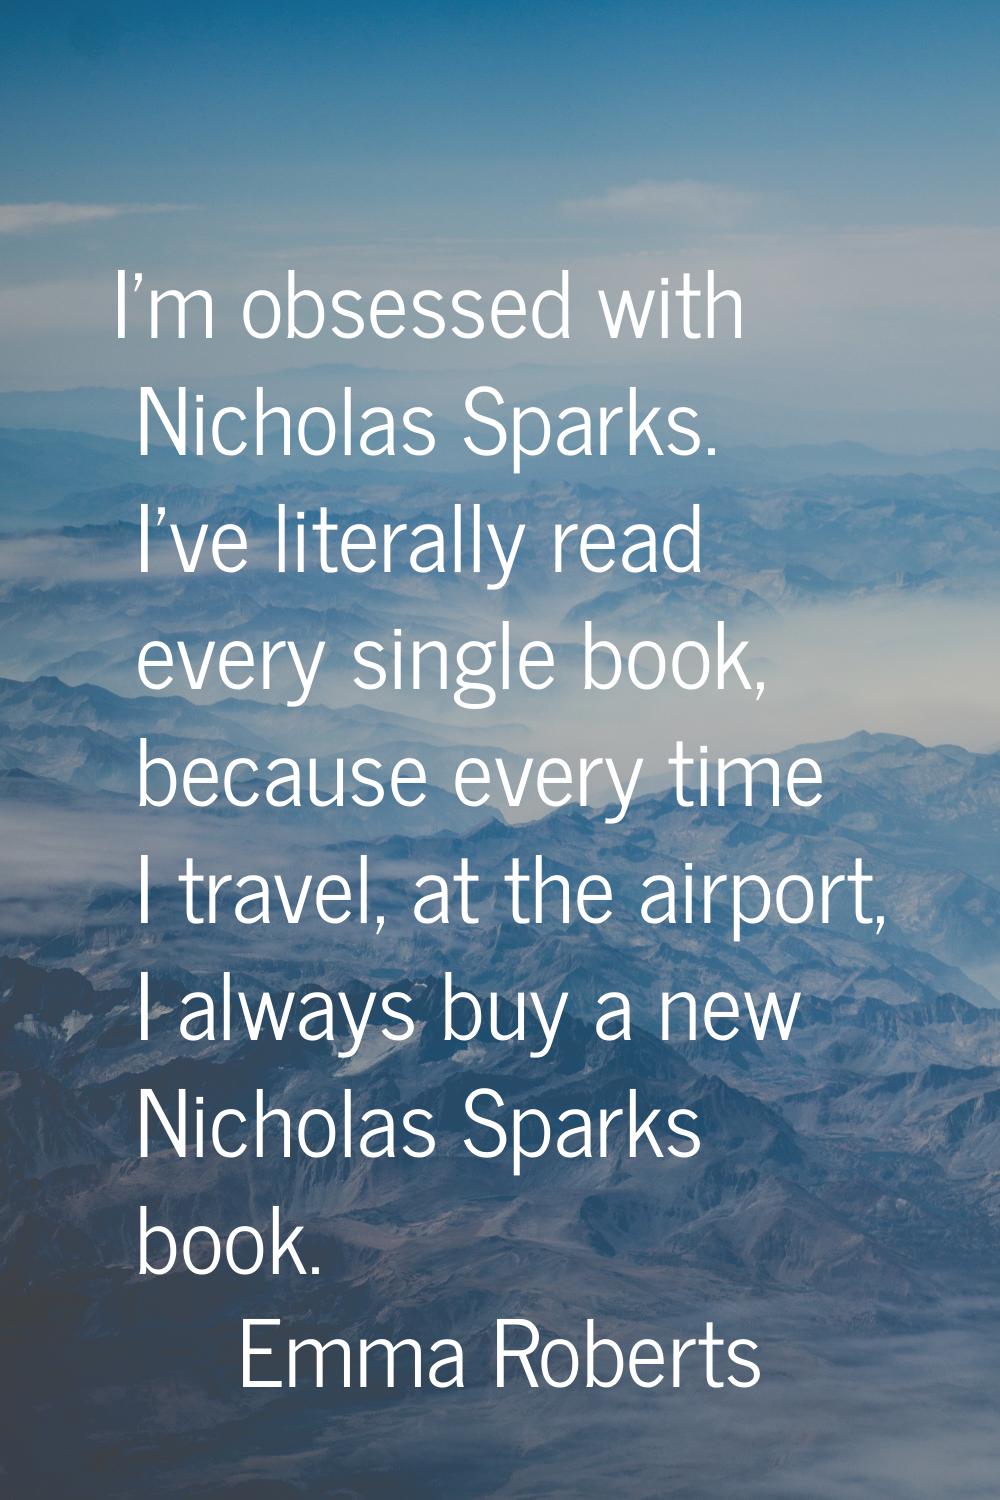 I'm obsessed with Nicholas Sparks. I've literally read every single book, because every time I trav